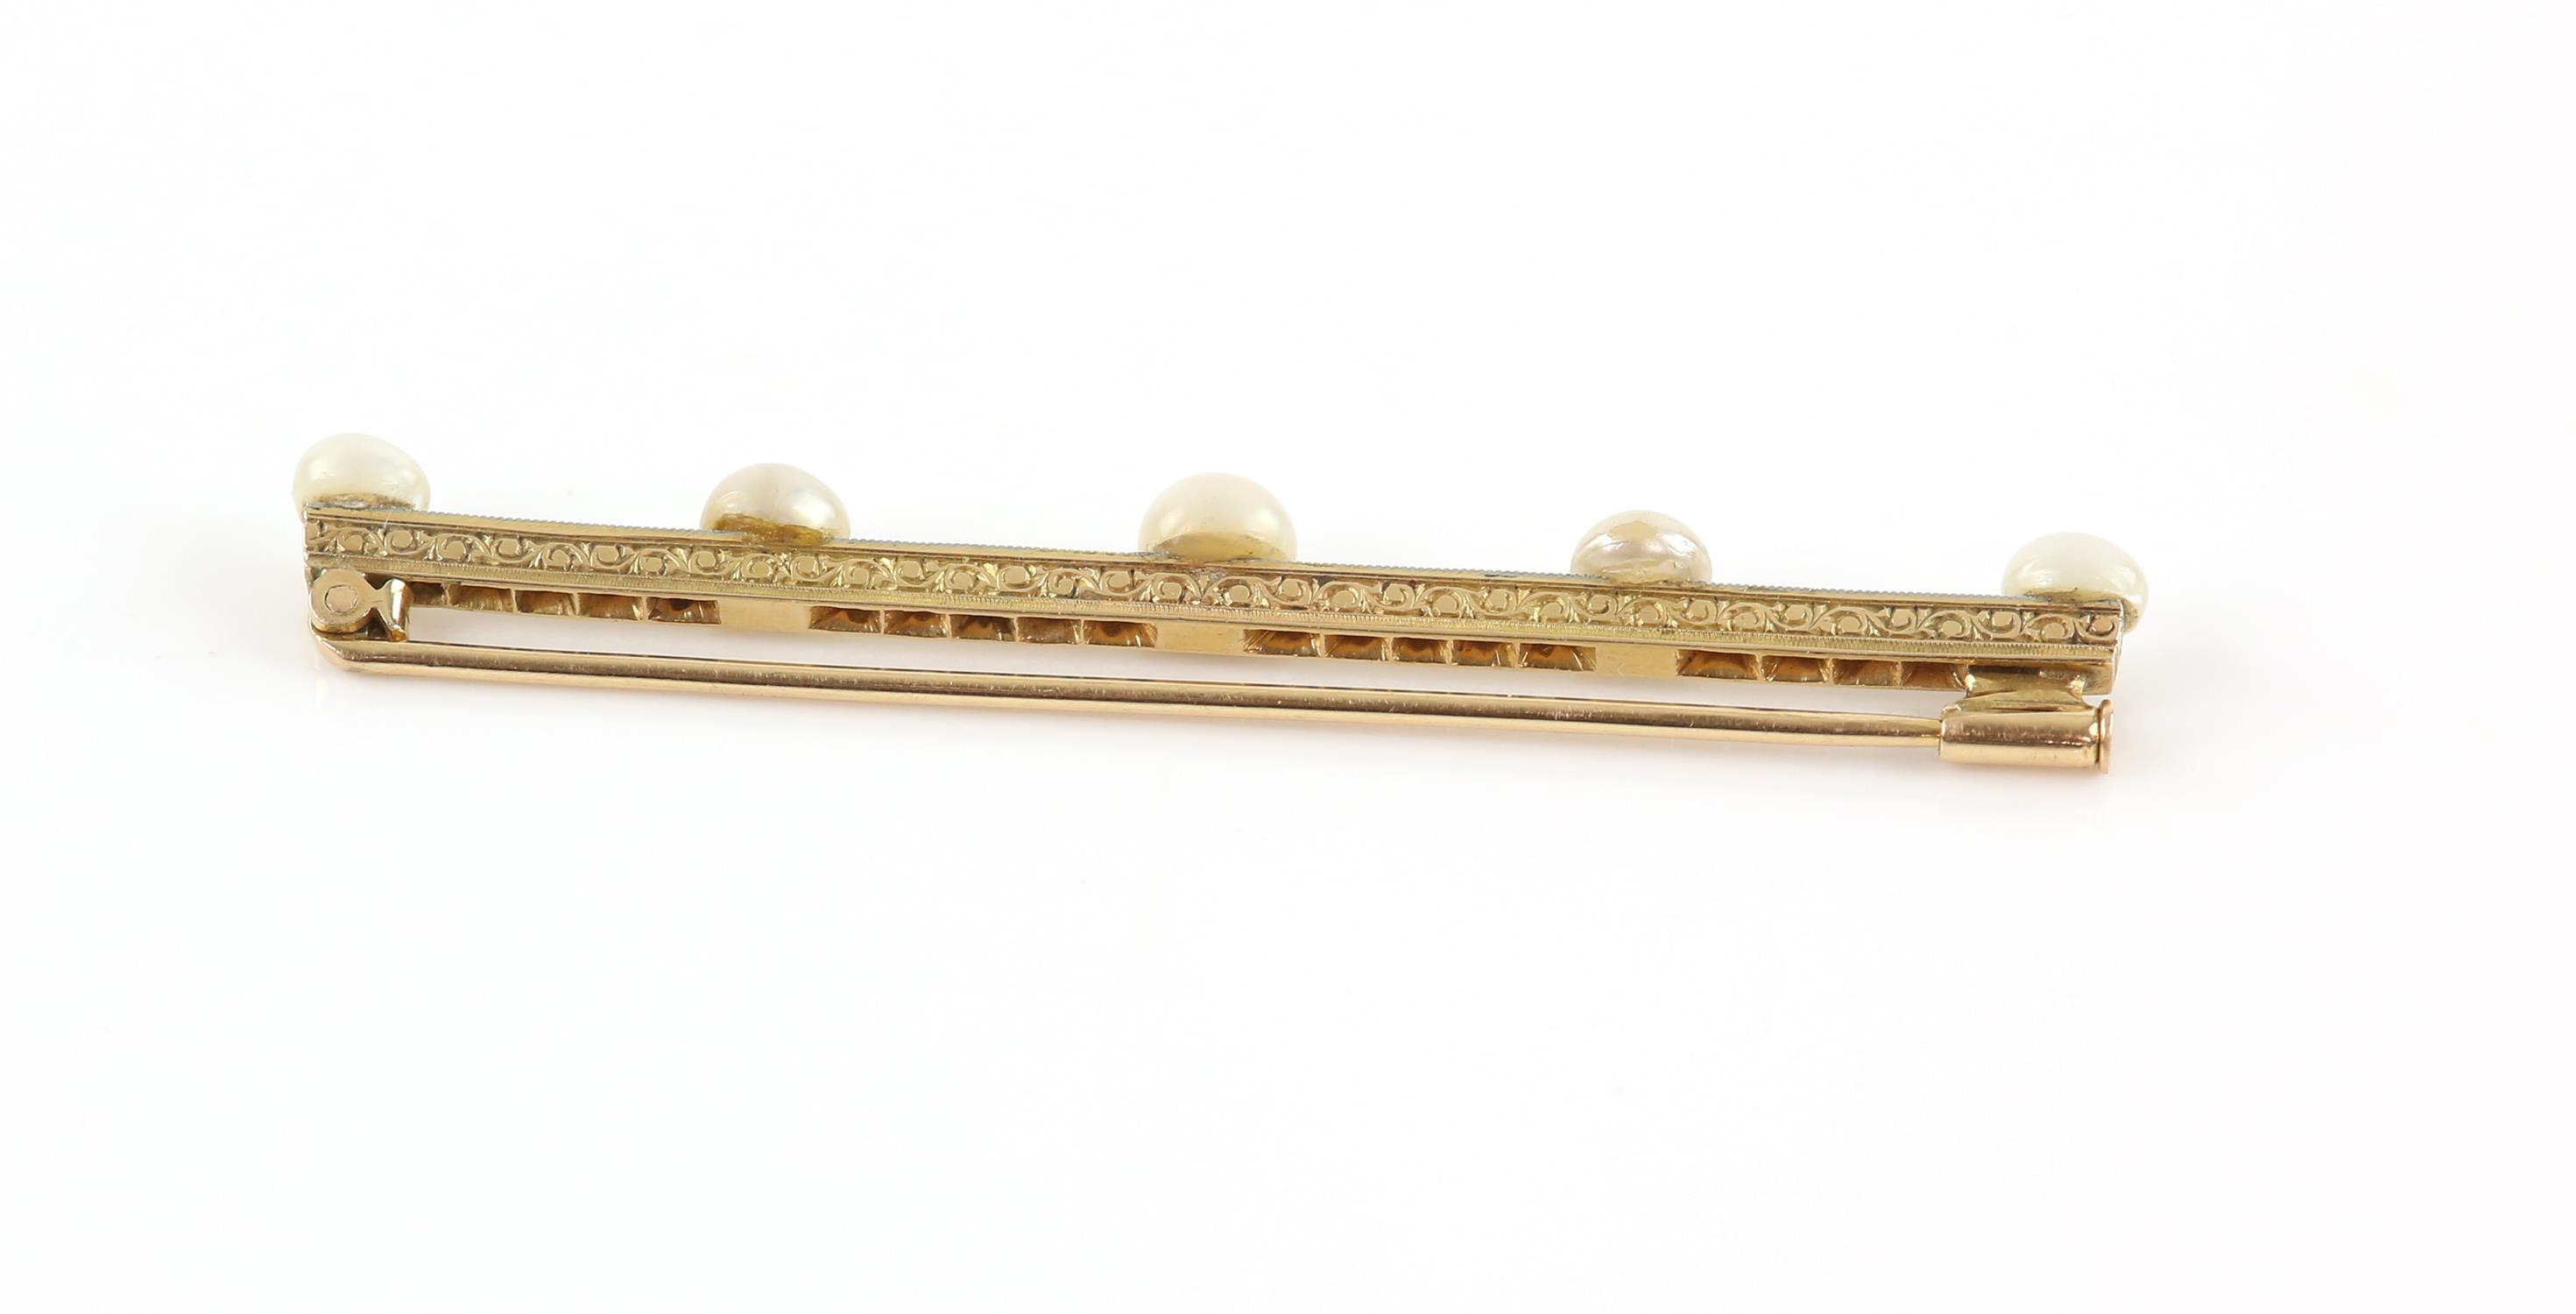 Edwardian pearl and diamond bar brooch, set with five bouton pearls, measuring from 4.7-5.9mm, - Image 2 of 2